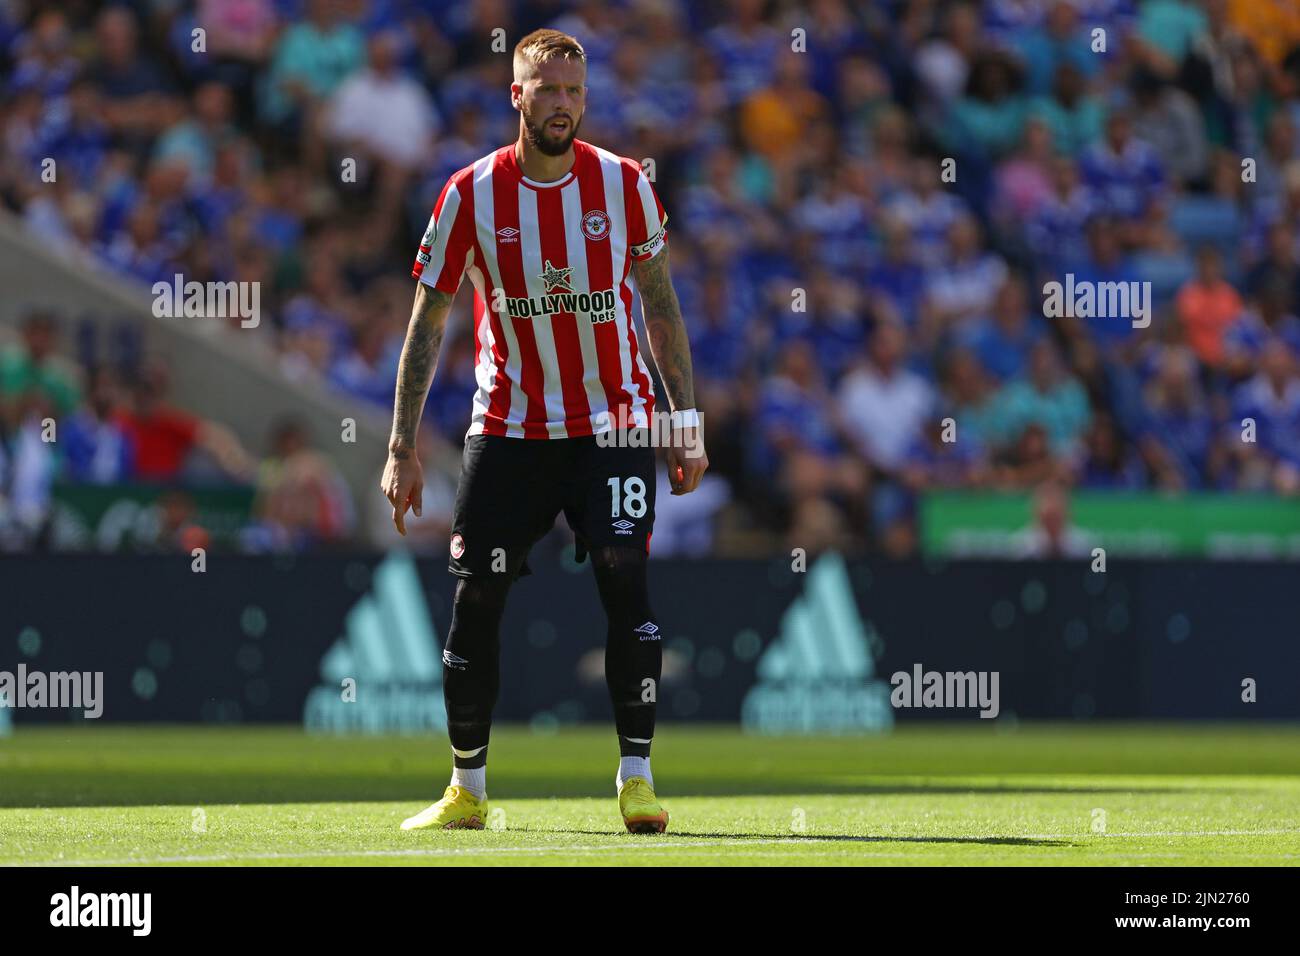 Pontus Jansson of Brentford - Leicester City v Brentford, Premier League, King Power Stadium, Leicester, UK - 7th August 2022  Editorial Use Only - DataCo restrictions apply Stock Photo